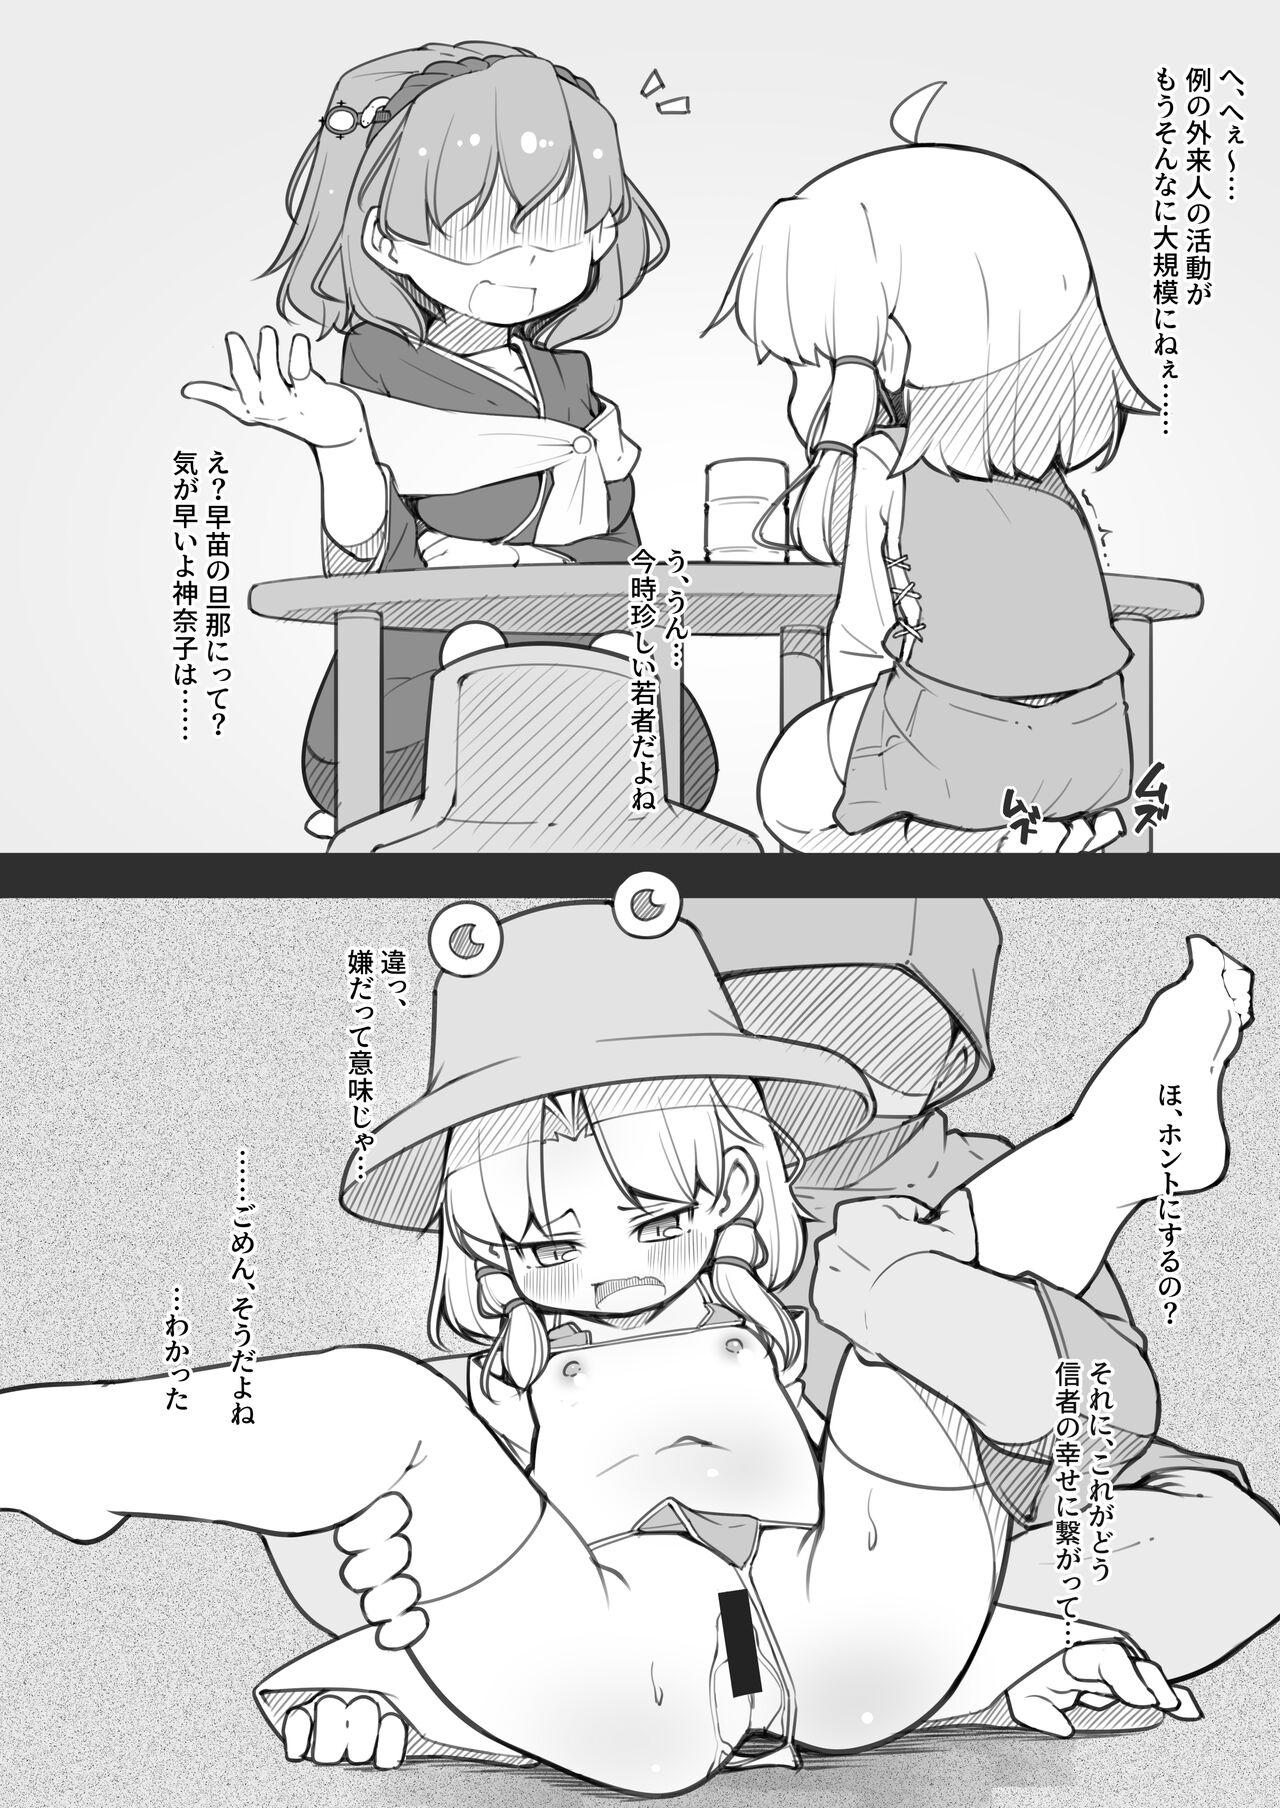 Hot Girl Porn 幻想入りしたカリスマ教祖に諏訪子さまが祀り上げられる話 - Touhou project Outside - Page 11